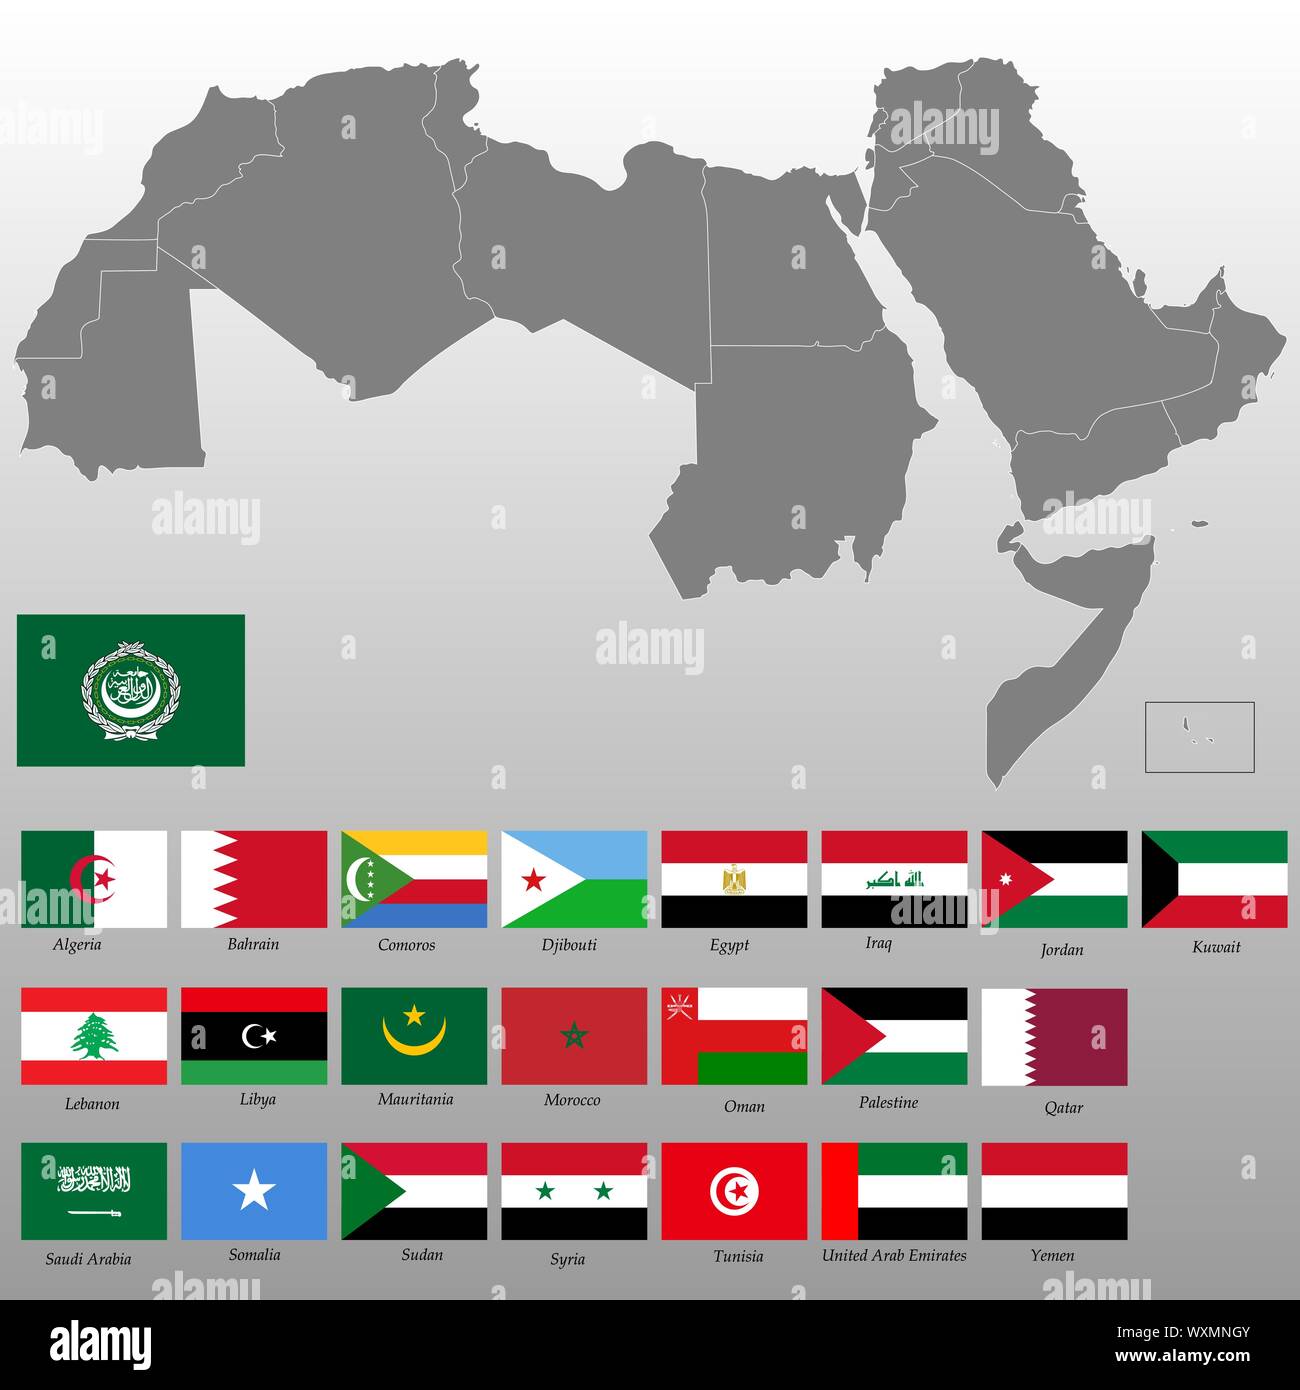 High Quality Map Of Arab World With Borders Of The States WXMNGY 